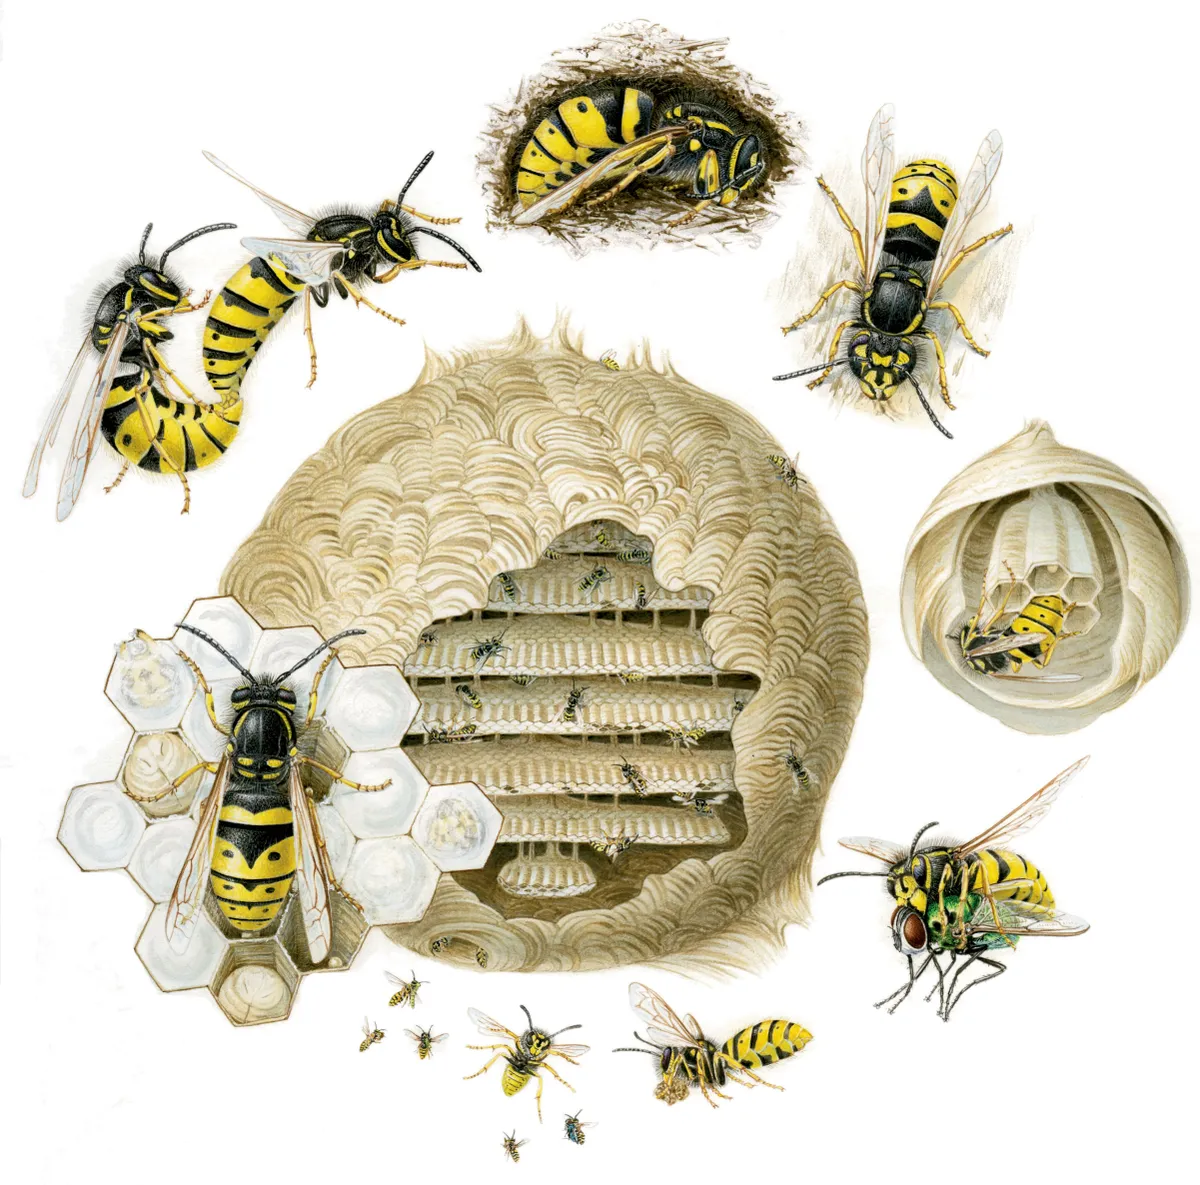 Lifecycle of wasps /nature.plc